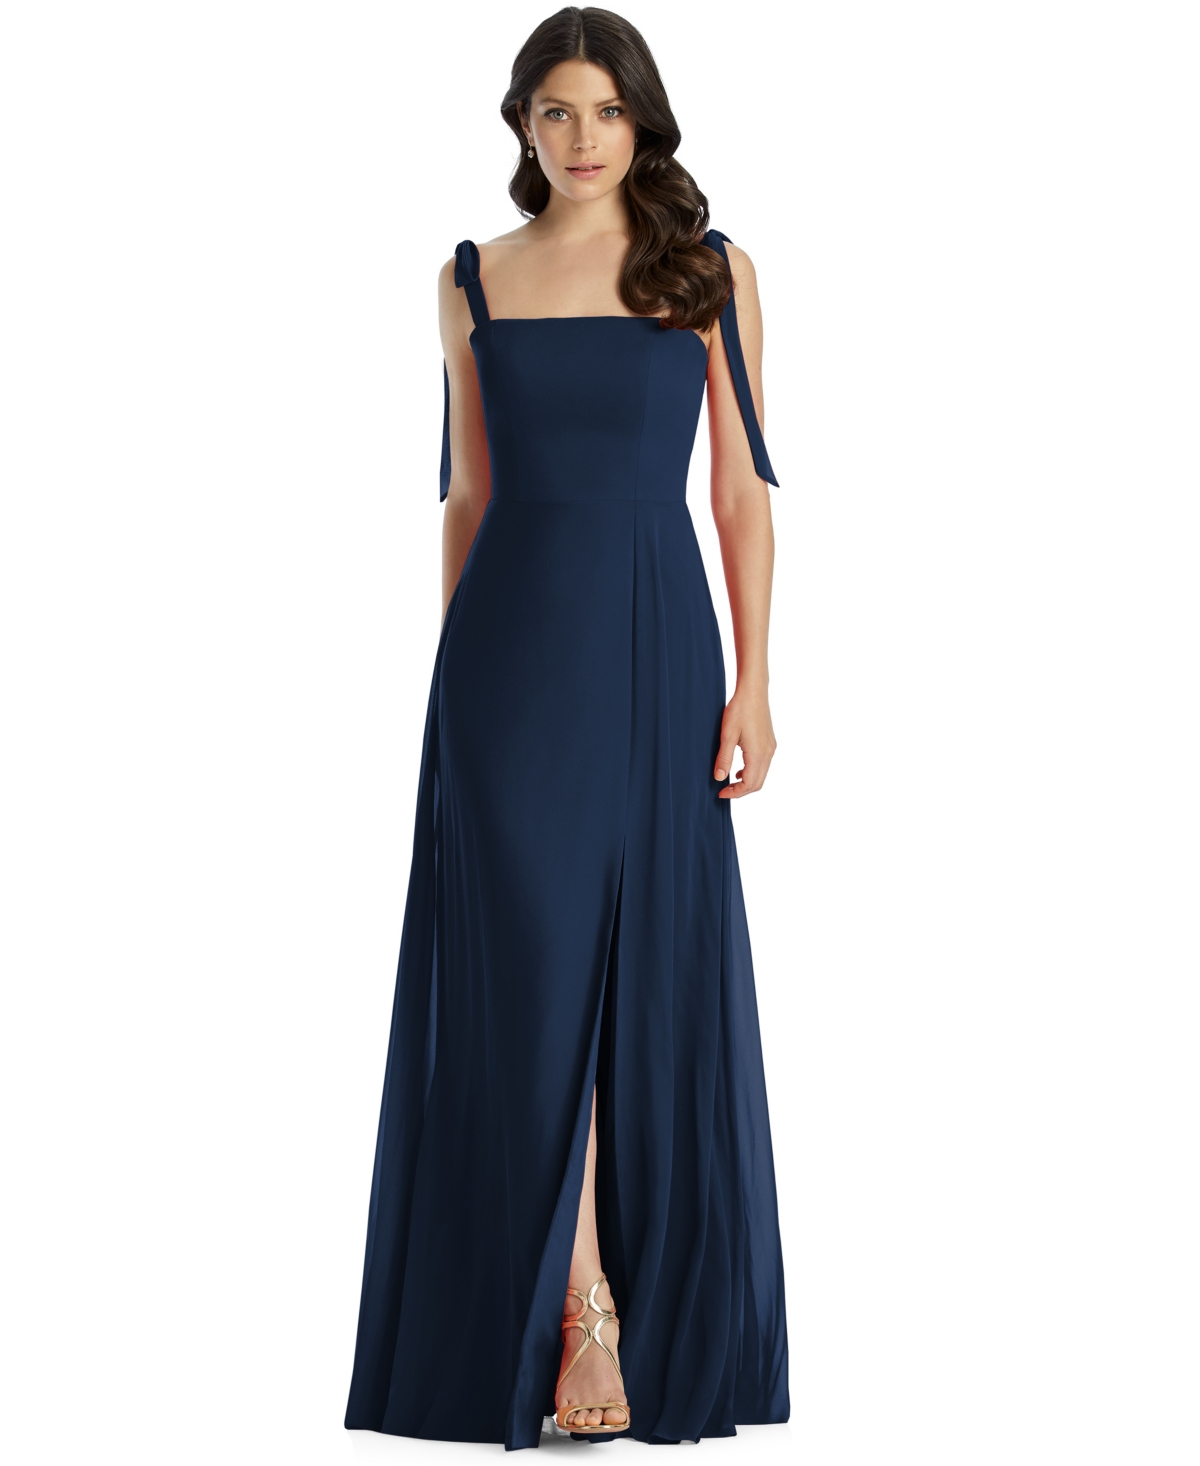 Dessy Collection Tie-Strap Chiffon Gown